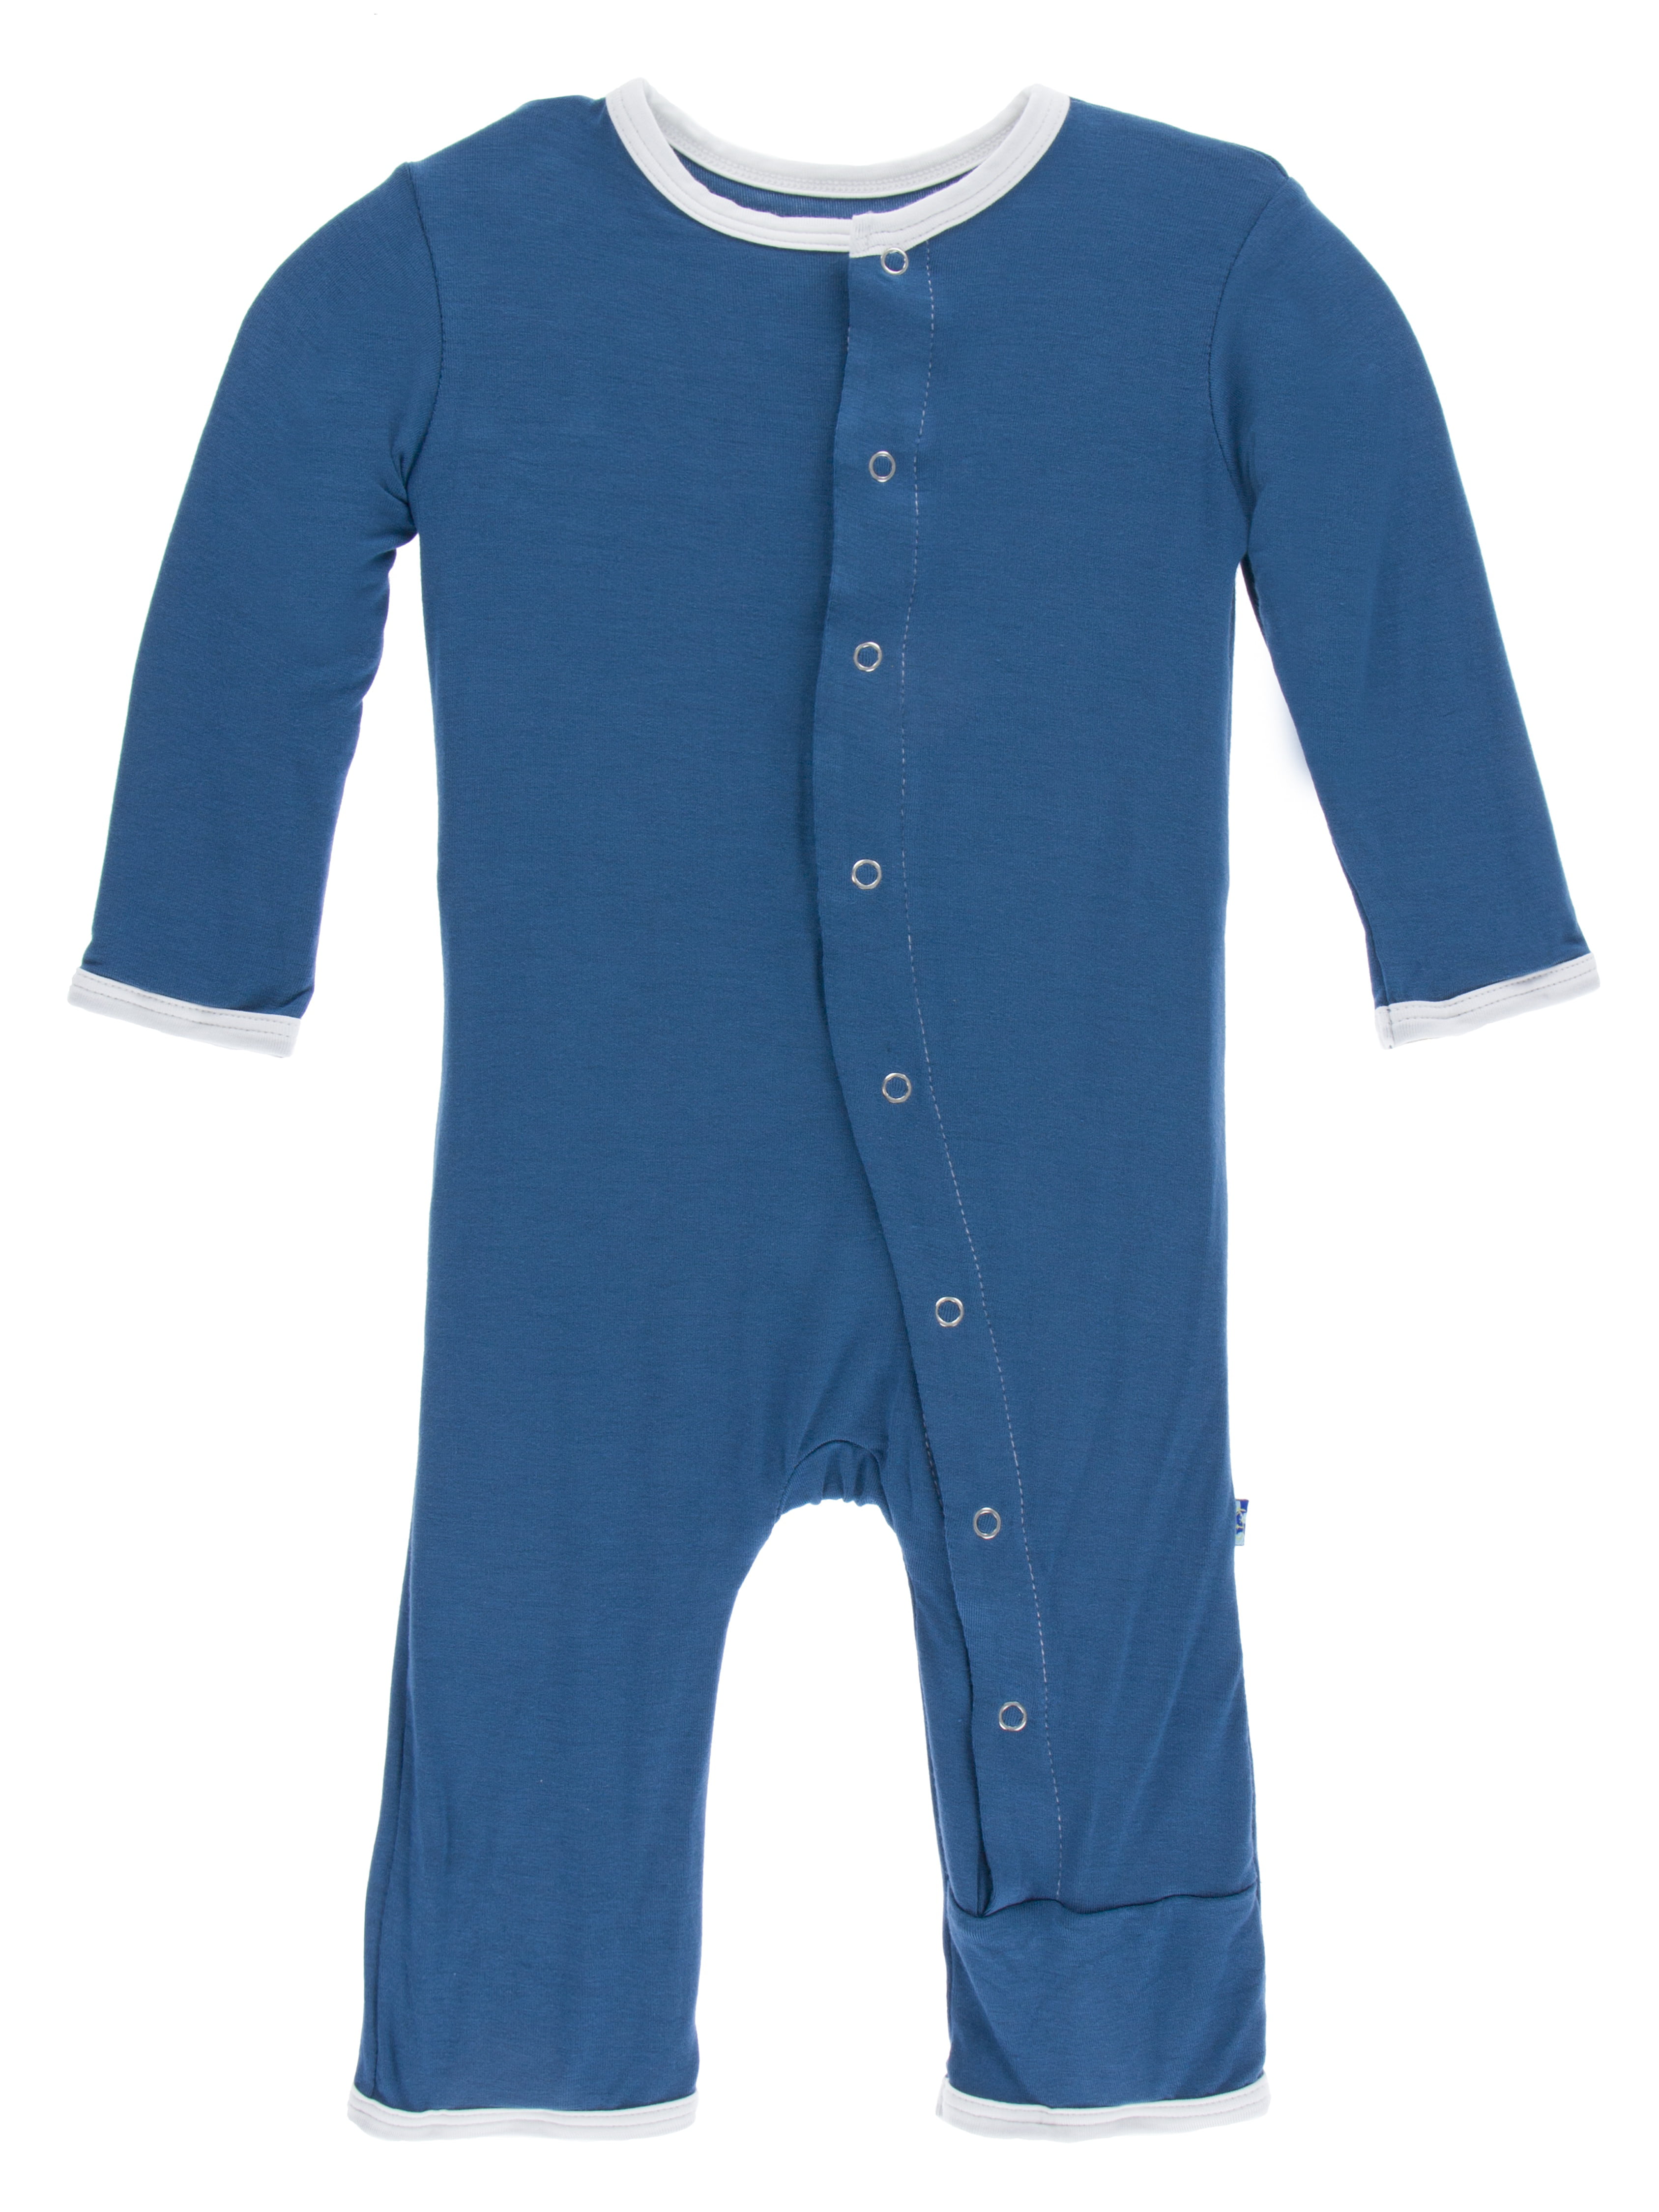 Long Sleeve Footless Bodysuit One Piece KicKee Pants Baby Coverall with Zipper 